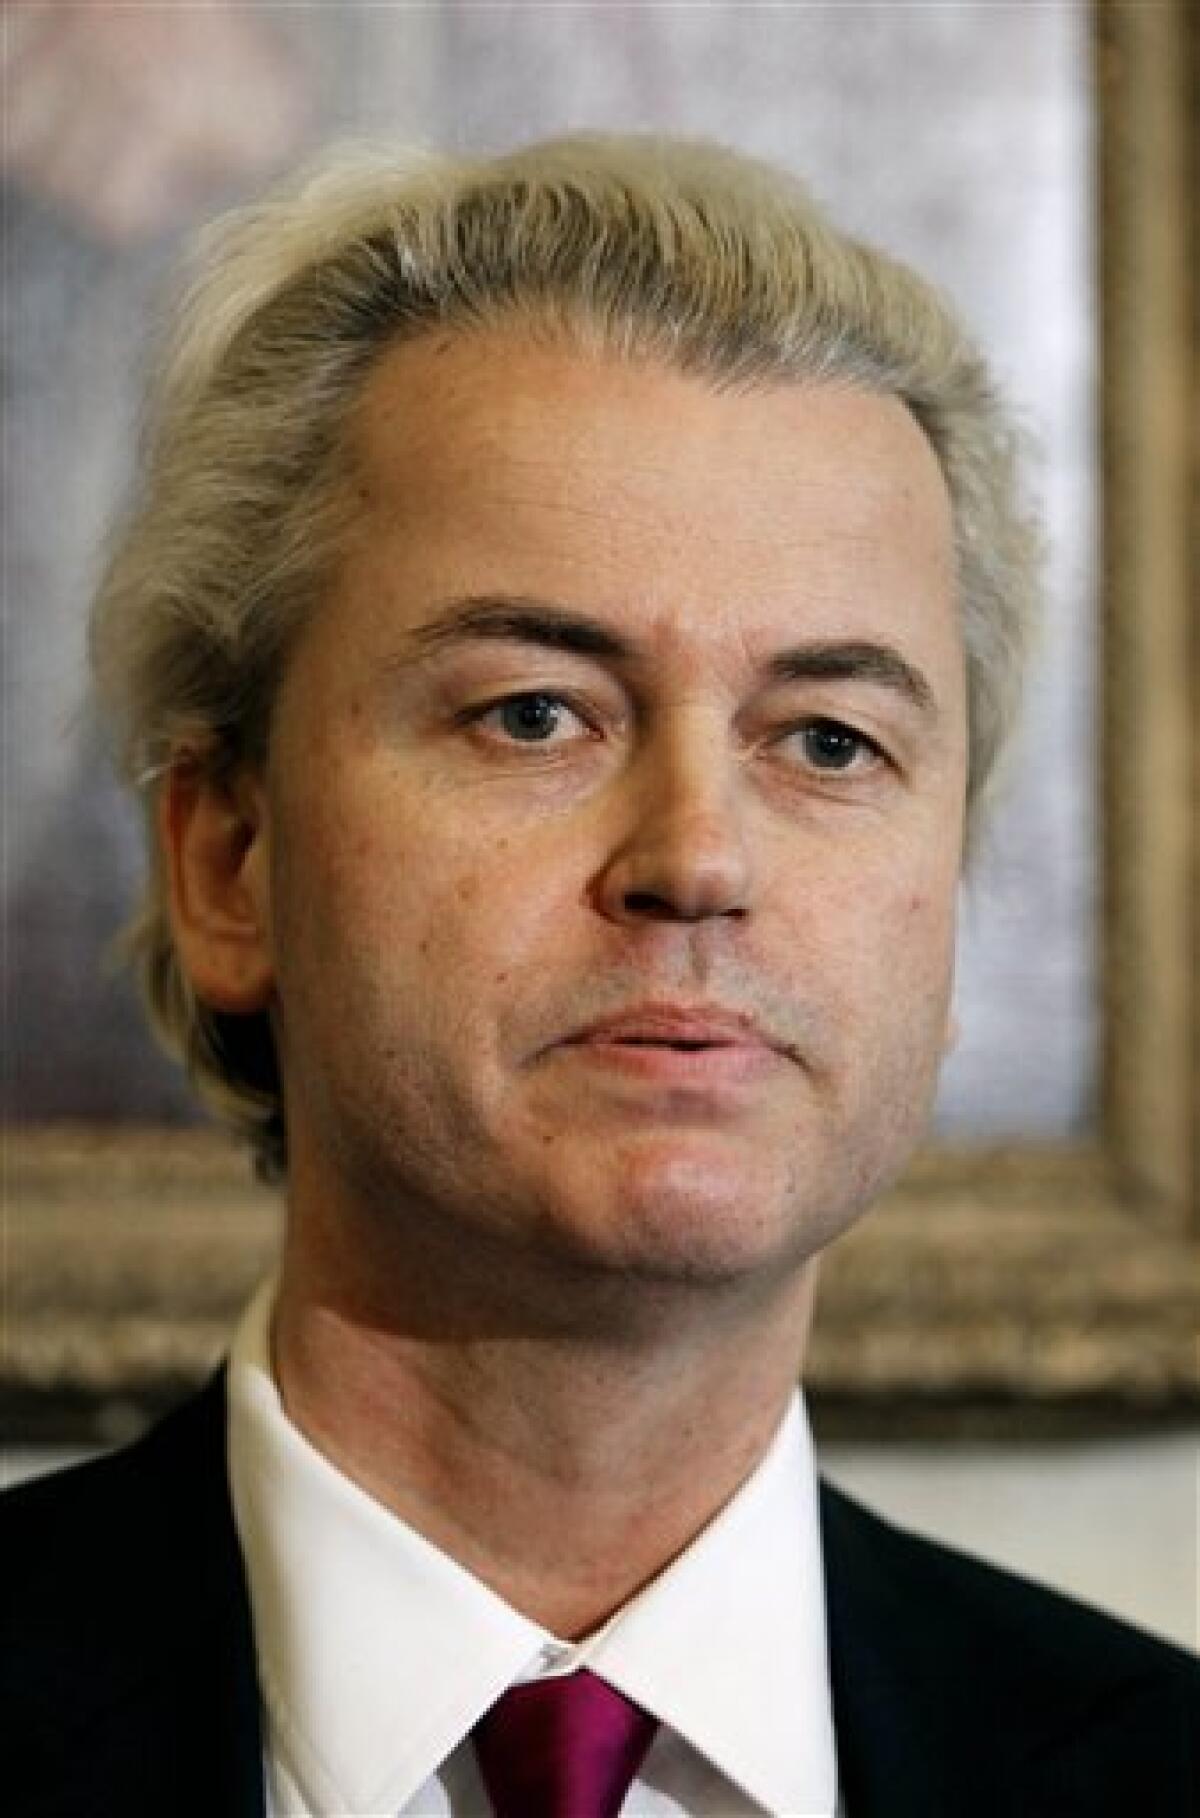 Controversial Dutch politician Geert Wilders speaks during a press conference in London, Friday, March 5, 2010. Dozens of demonstrators gathered outside of Britain's Parliament on Friday, ahead of the viewing of an anti-Islam film by Dutch politician Geert Wilders, whose strong showing in a local elections sparked concern that his anti-immigrant views have become widely accepted in the Netherlands. (AP Photo/Matt Dunham)